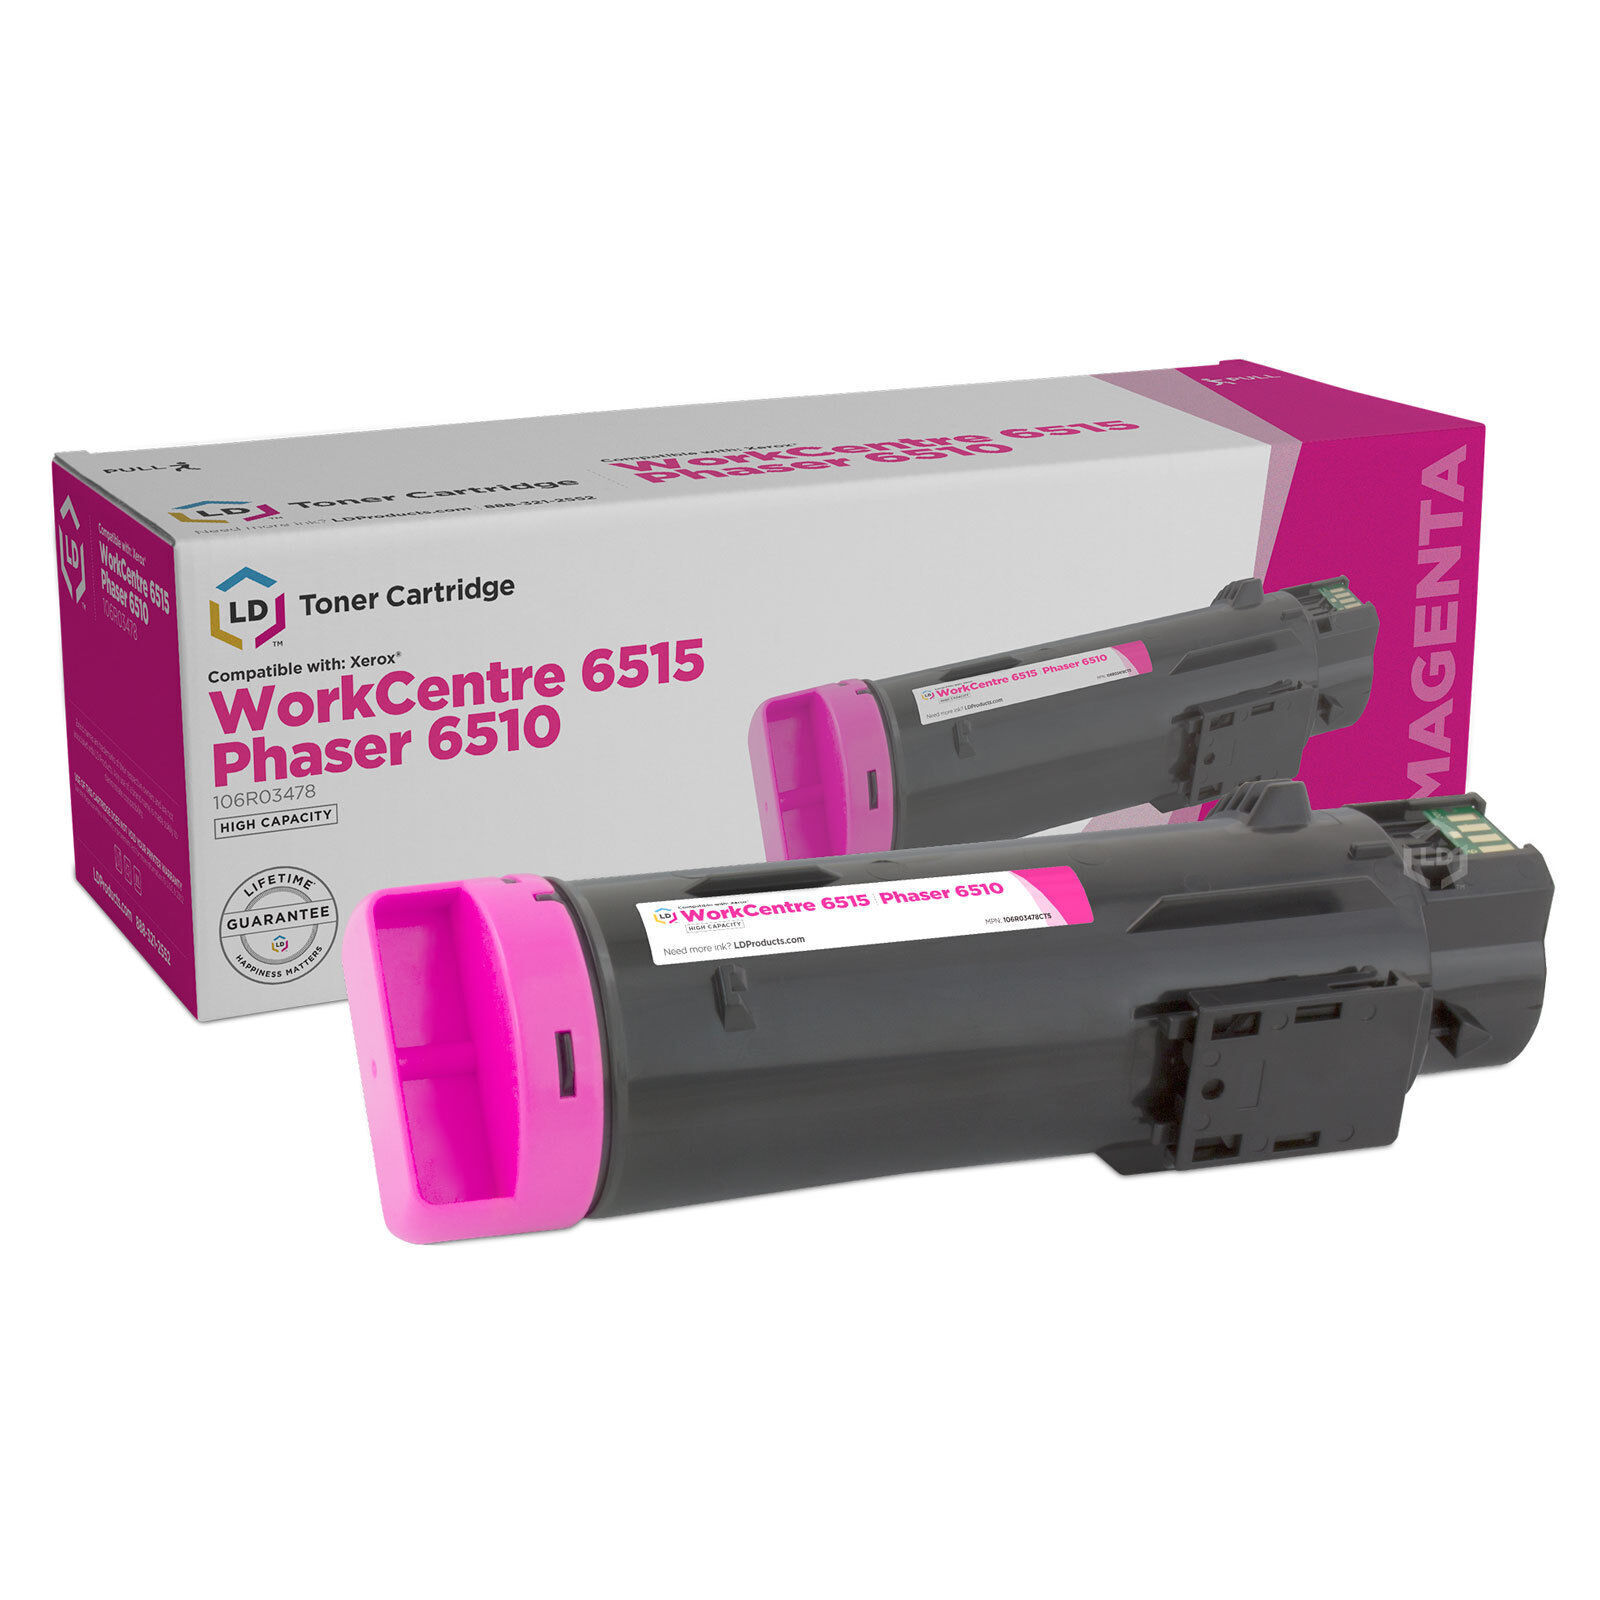 LD Compatible Xerox 106R03478 HY Magenta Toner for Phaser 6515 & WorkCentre 6515